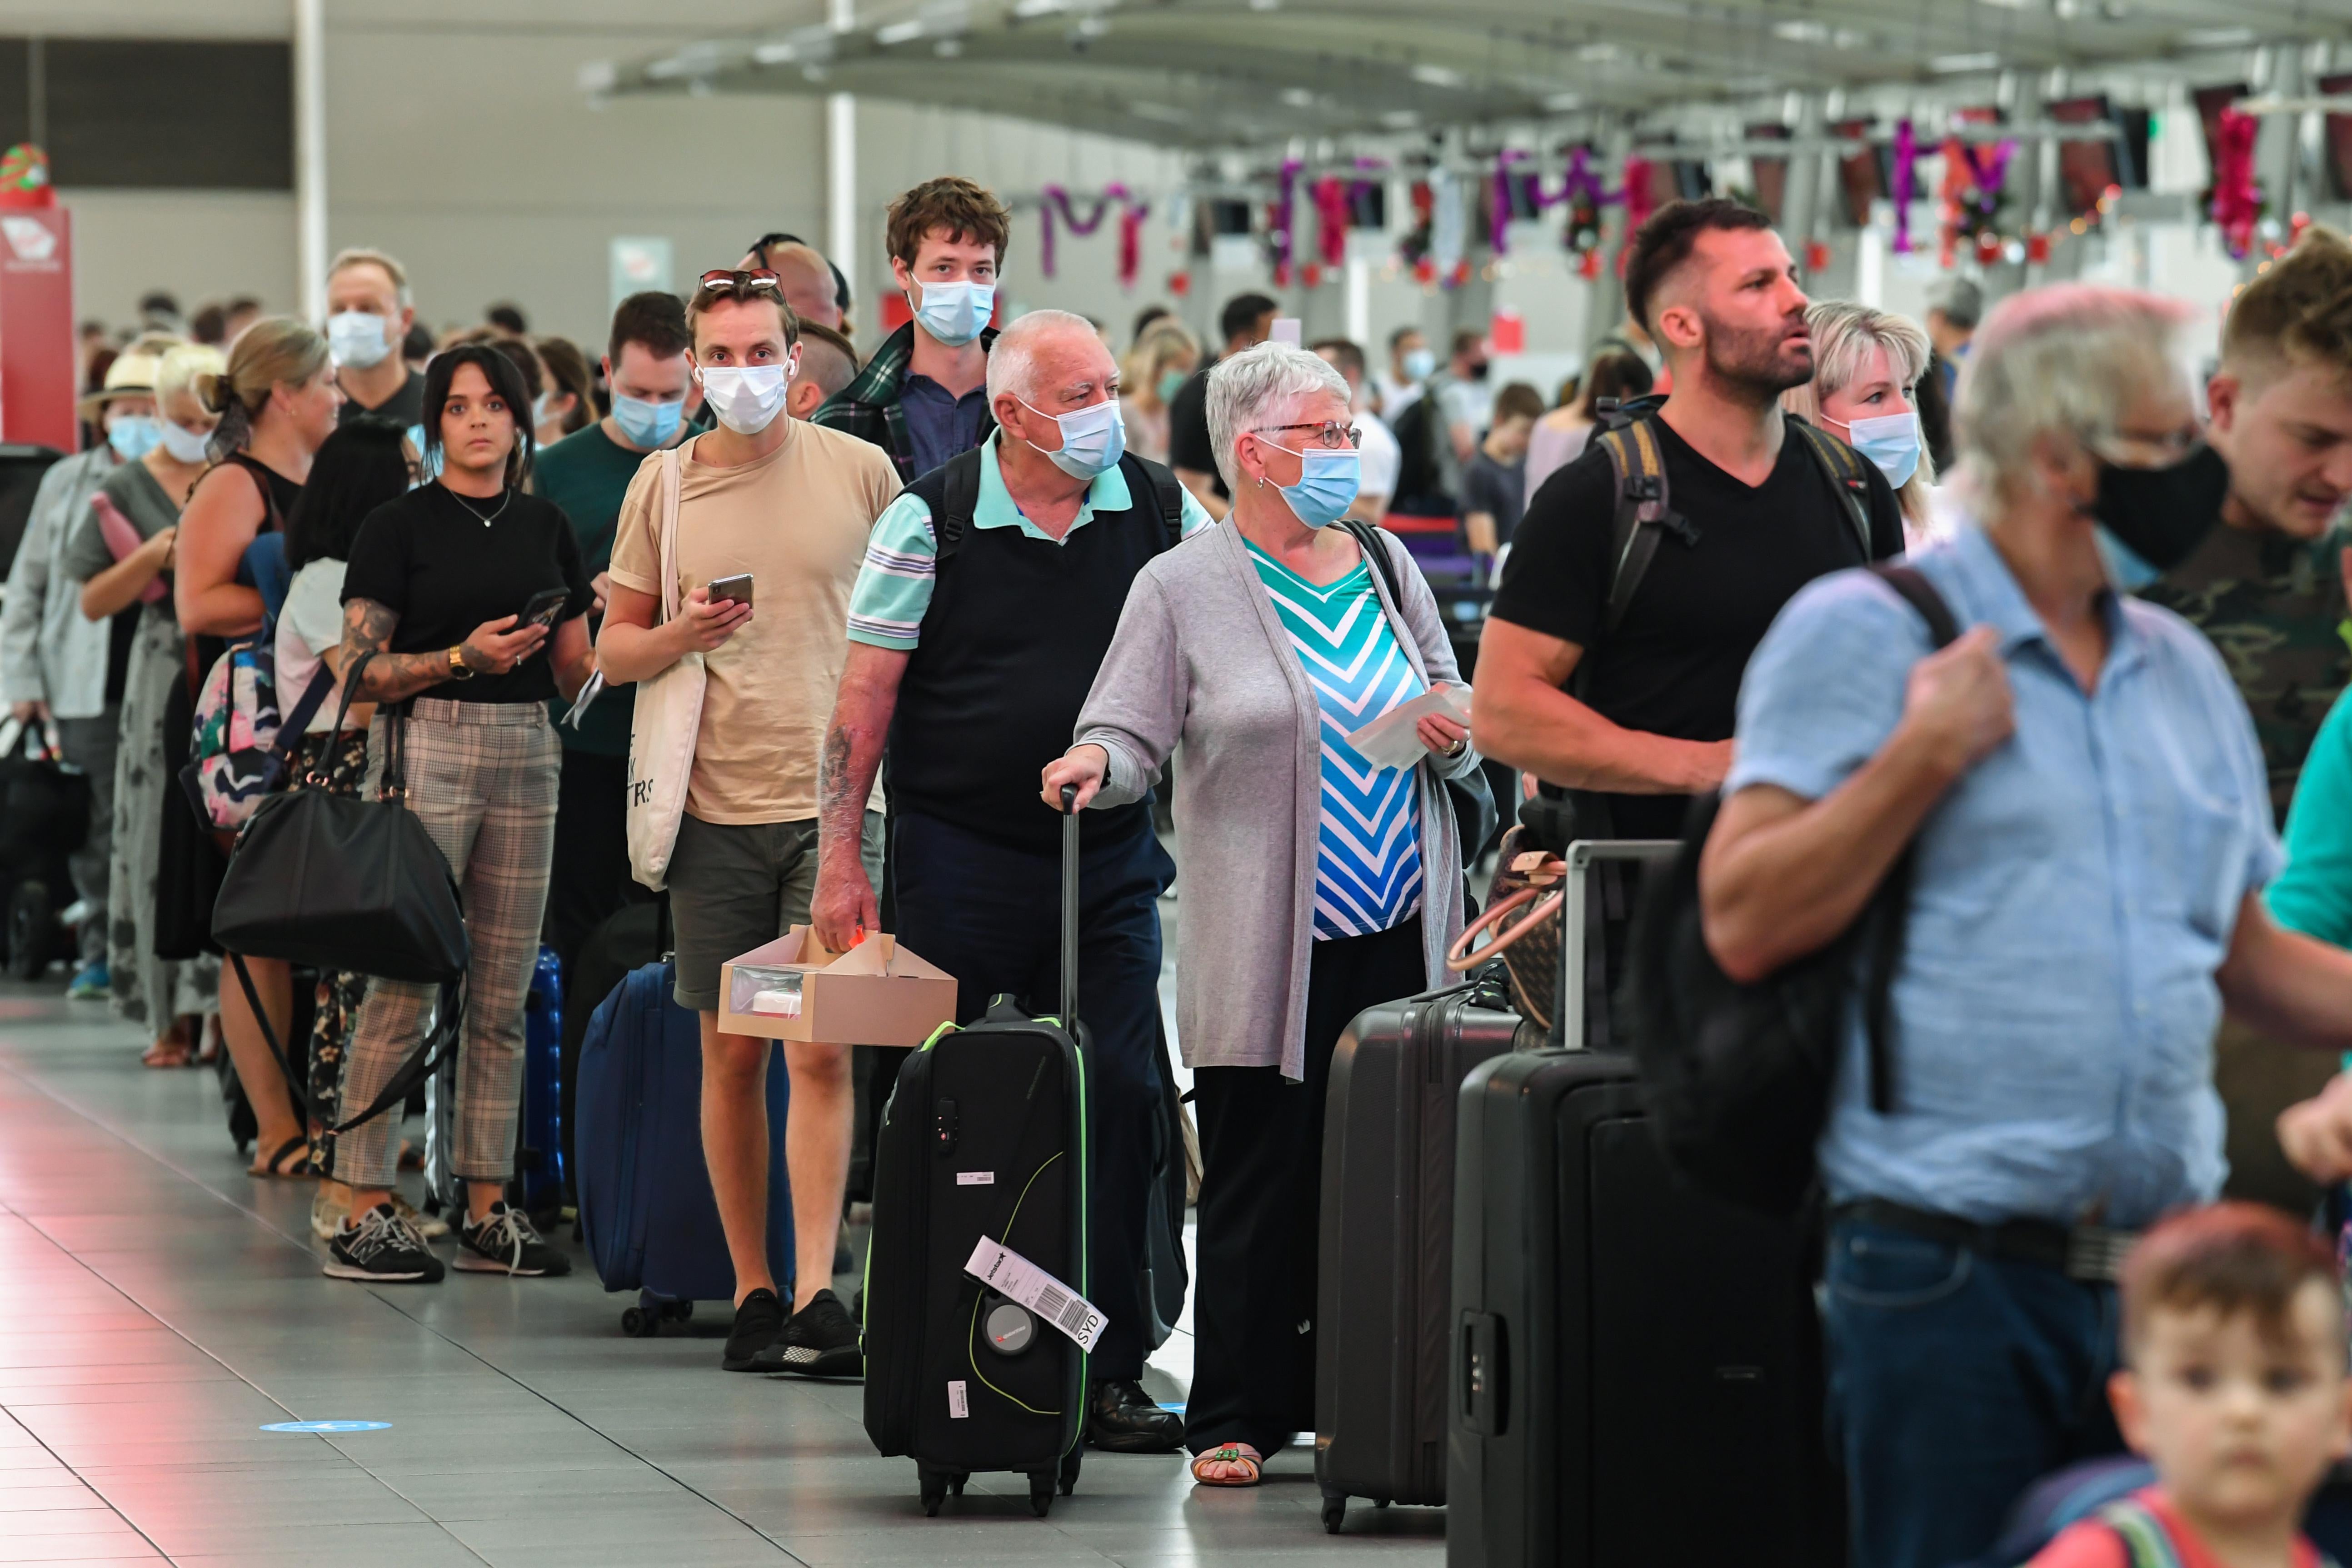 People, some wearing masks, stand in line with luggage in an airport.